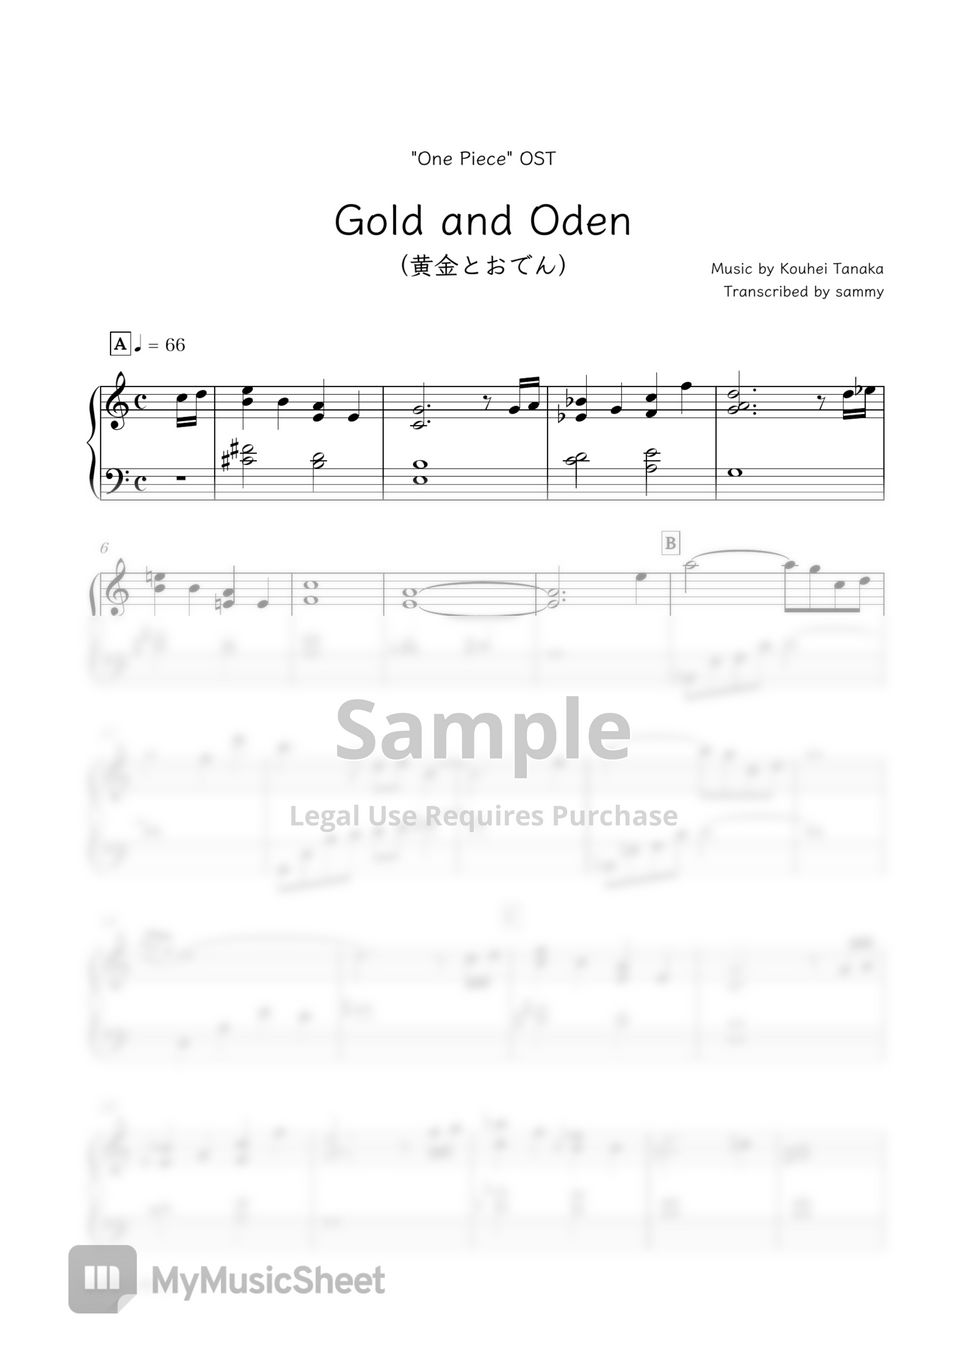 One Piece - World's Number One Oden Store Sheet music for Piano (Solo)